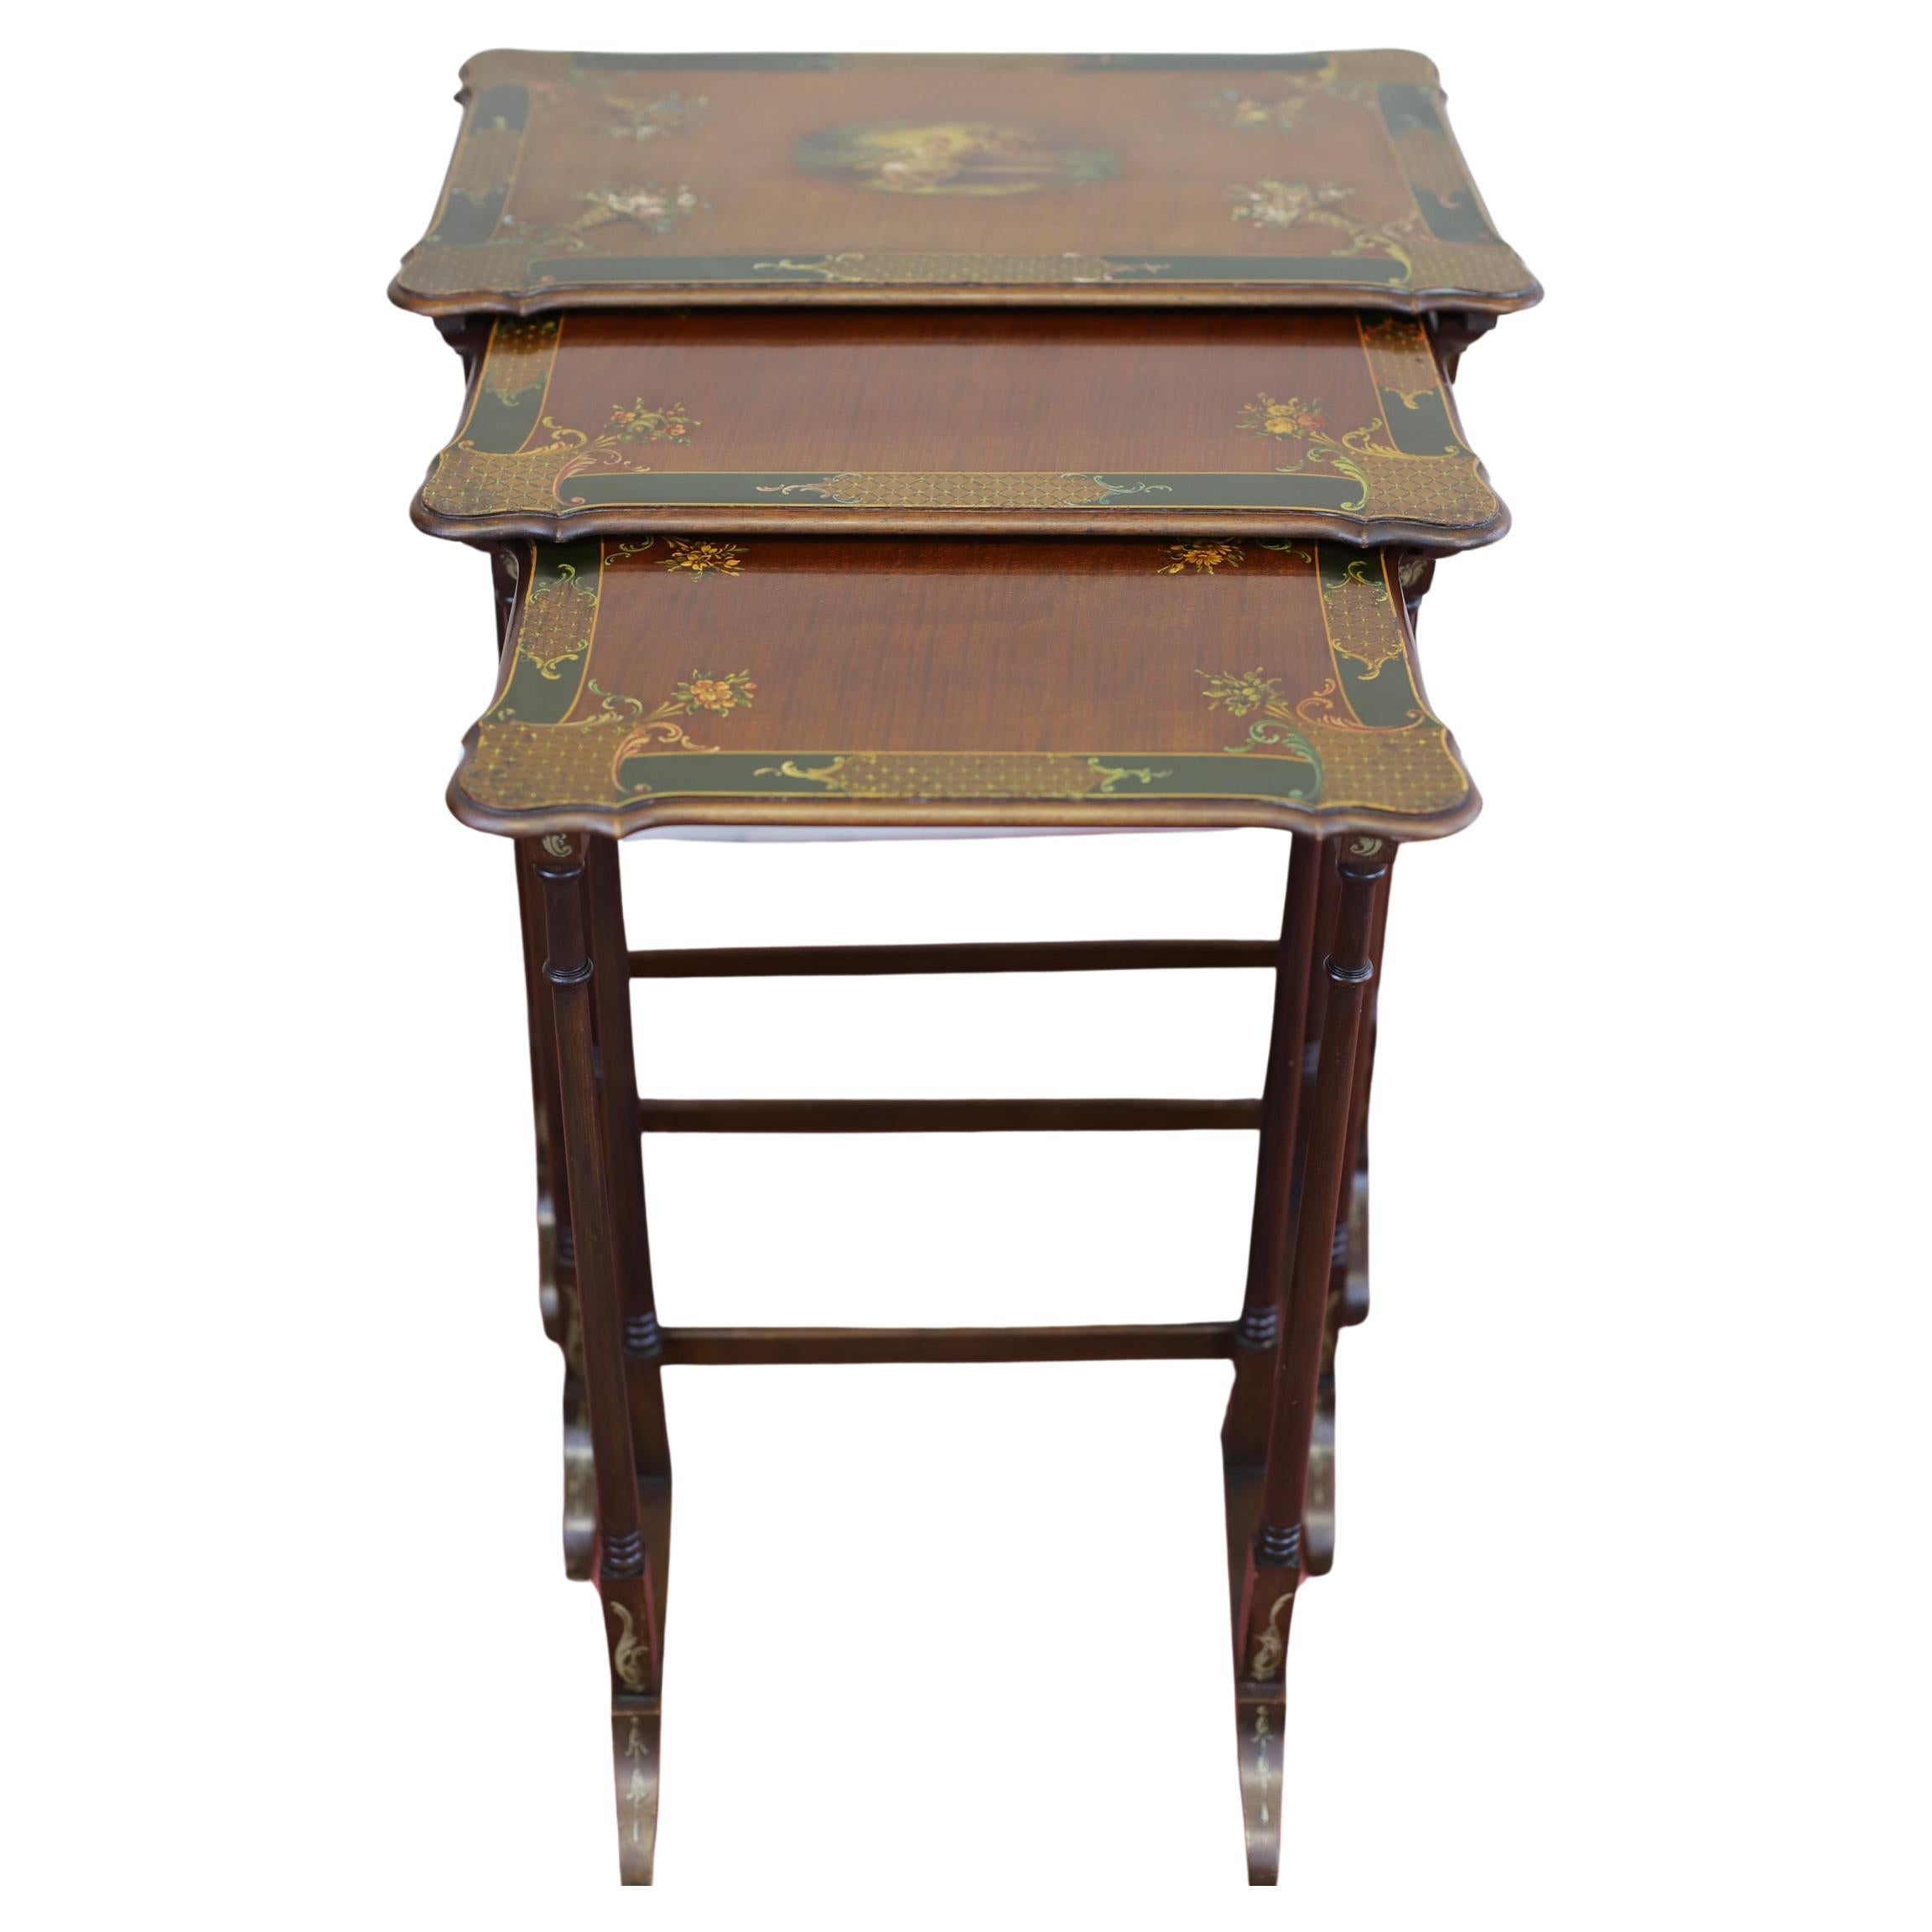 This is a beautiful set of three Victorian Mahogany hand-painted nesting tables. The tables are designed with a multicoloured finish and are perfect for antique enthusiasts. The tables are made from high-quality materials and each top finely painted